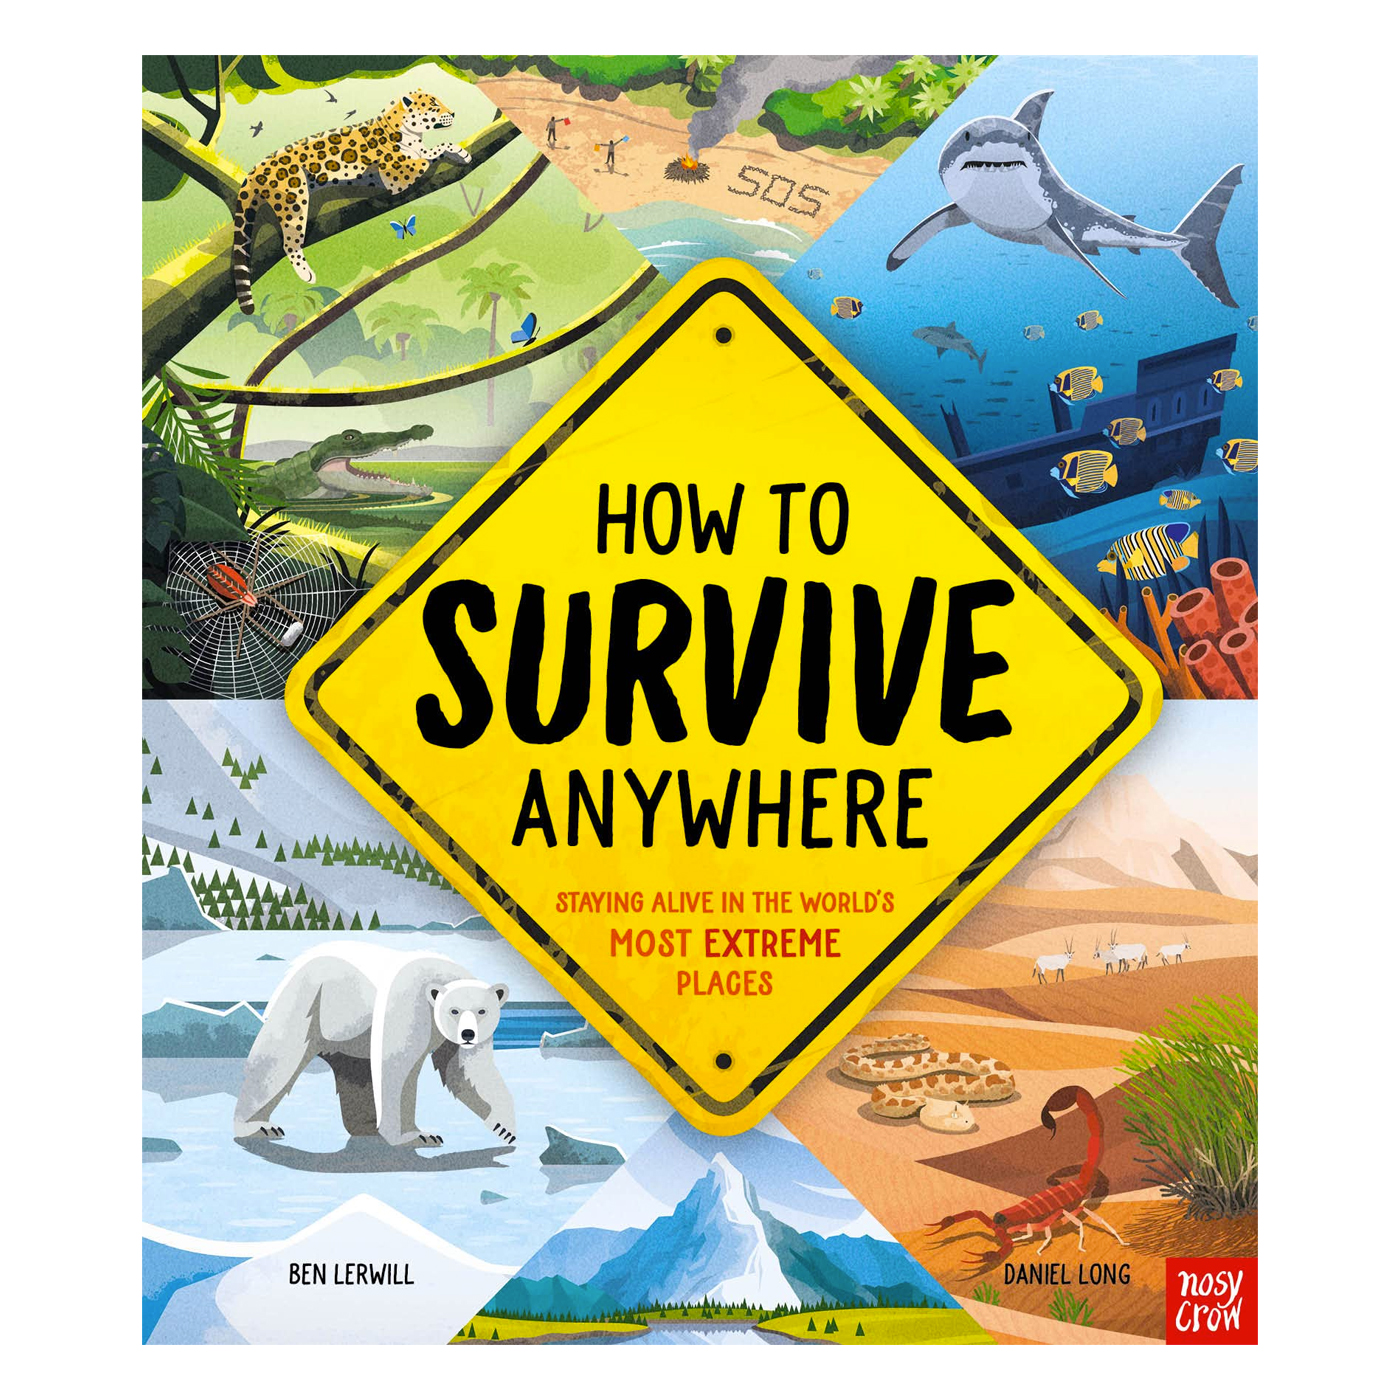  How To Survive Anywhere